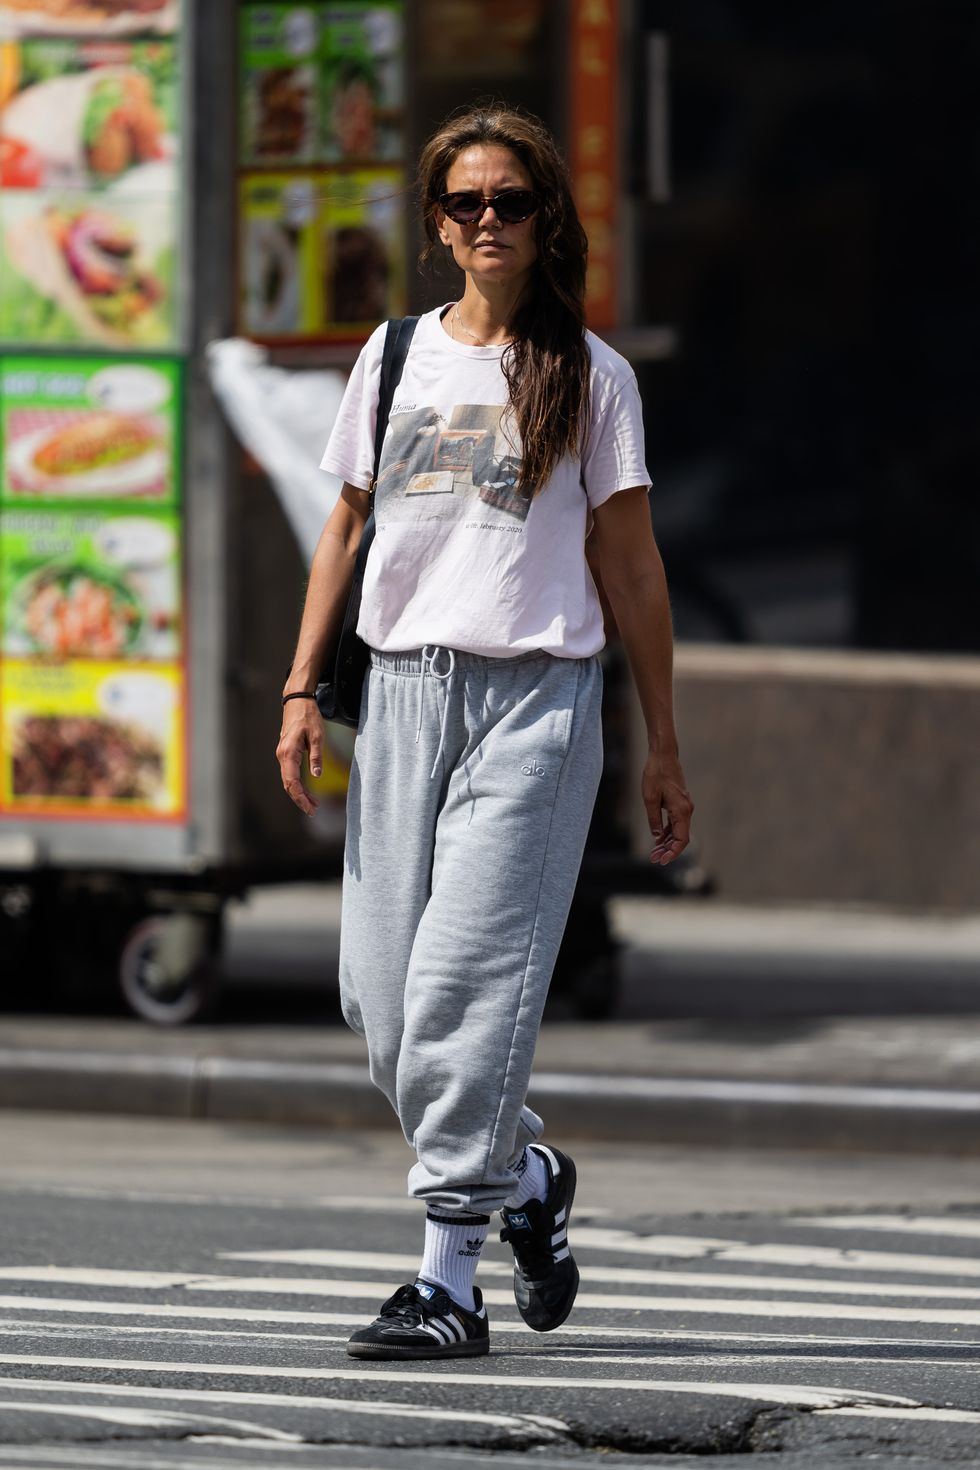 Katie Holmes Wore Baggy Jeans With a Big Black Tote Bag